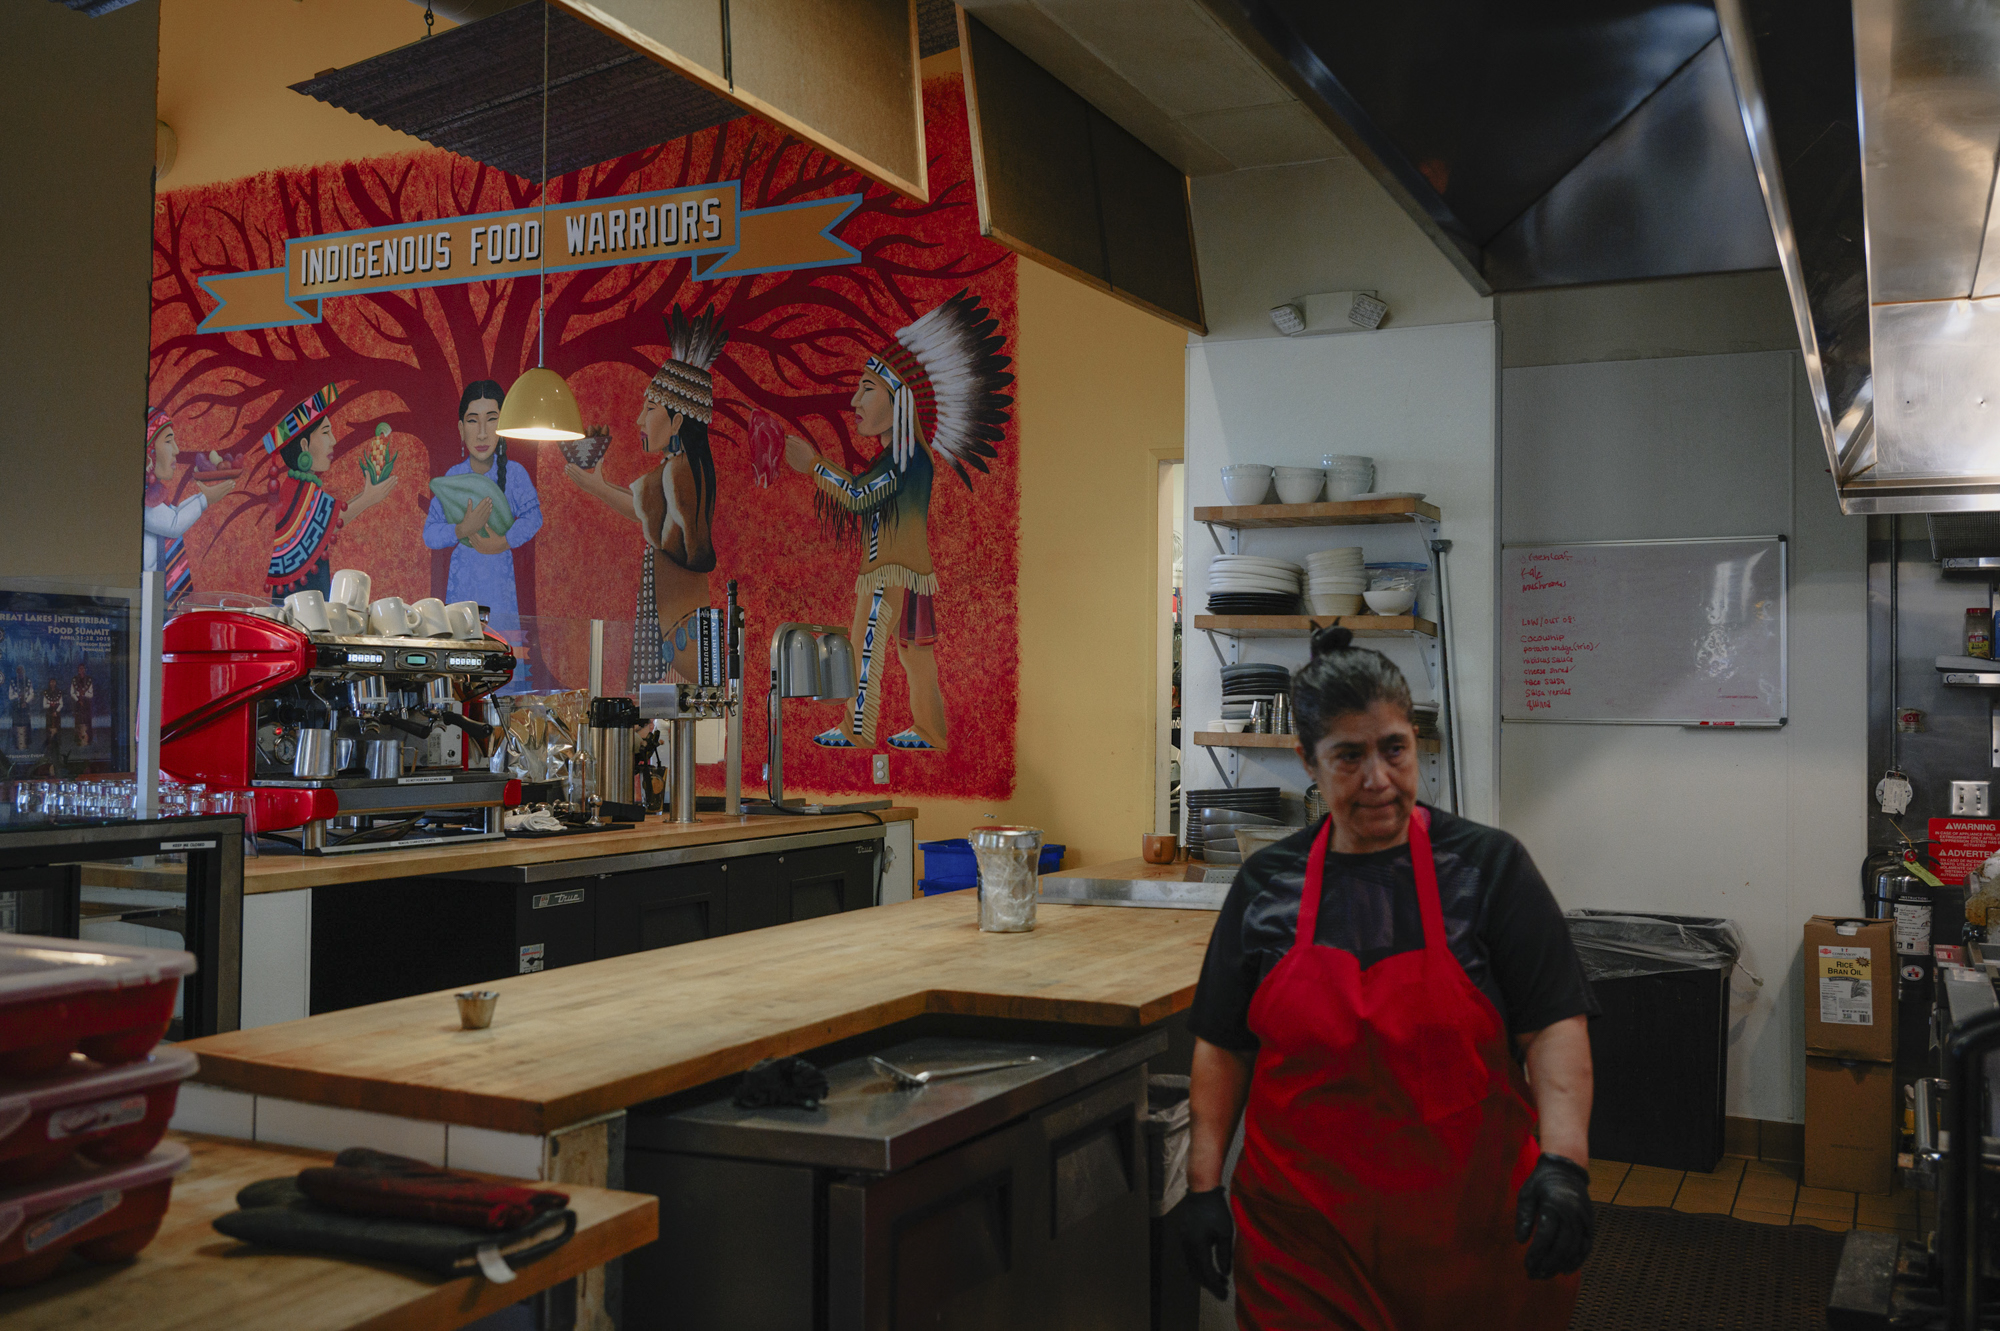 A woman in a red apron walks through a room on one wall of which a mural is painted of people wearing a variety of indigenous clothing and above which the words "INDIGENOUS FOOD WARRIORS" is written.